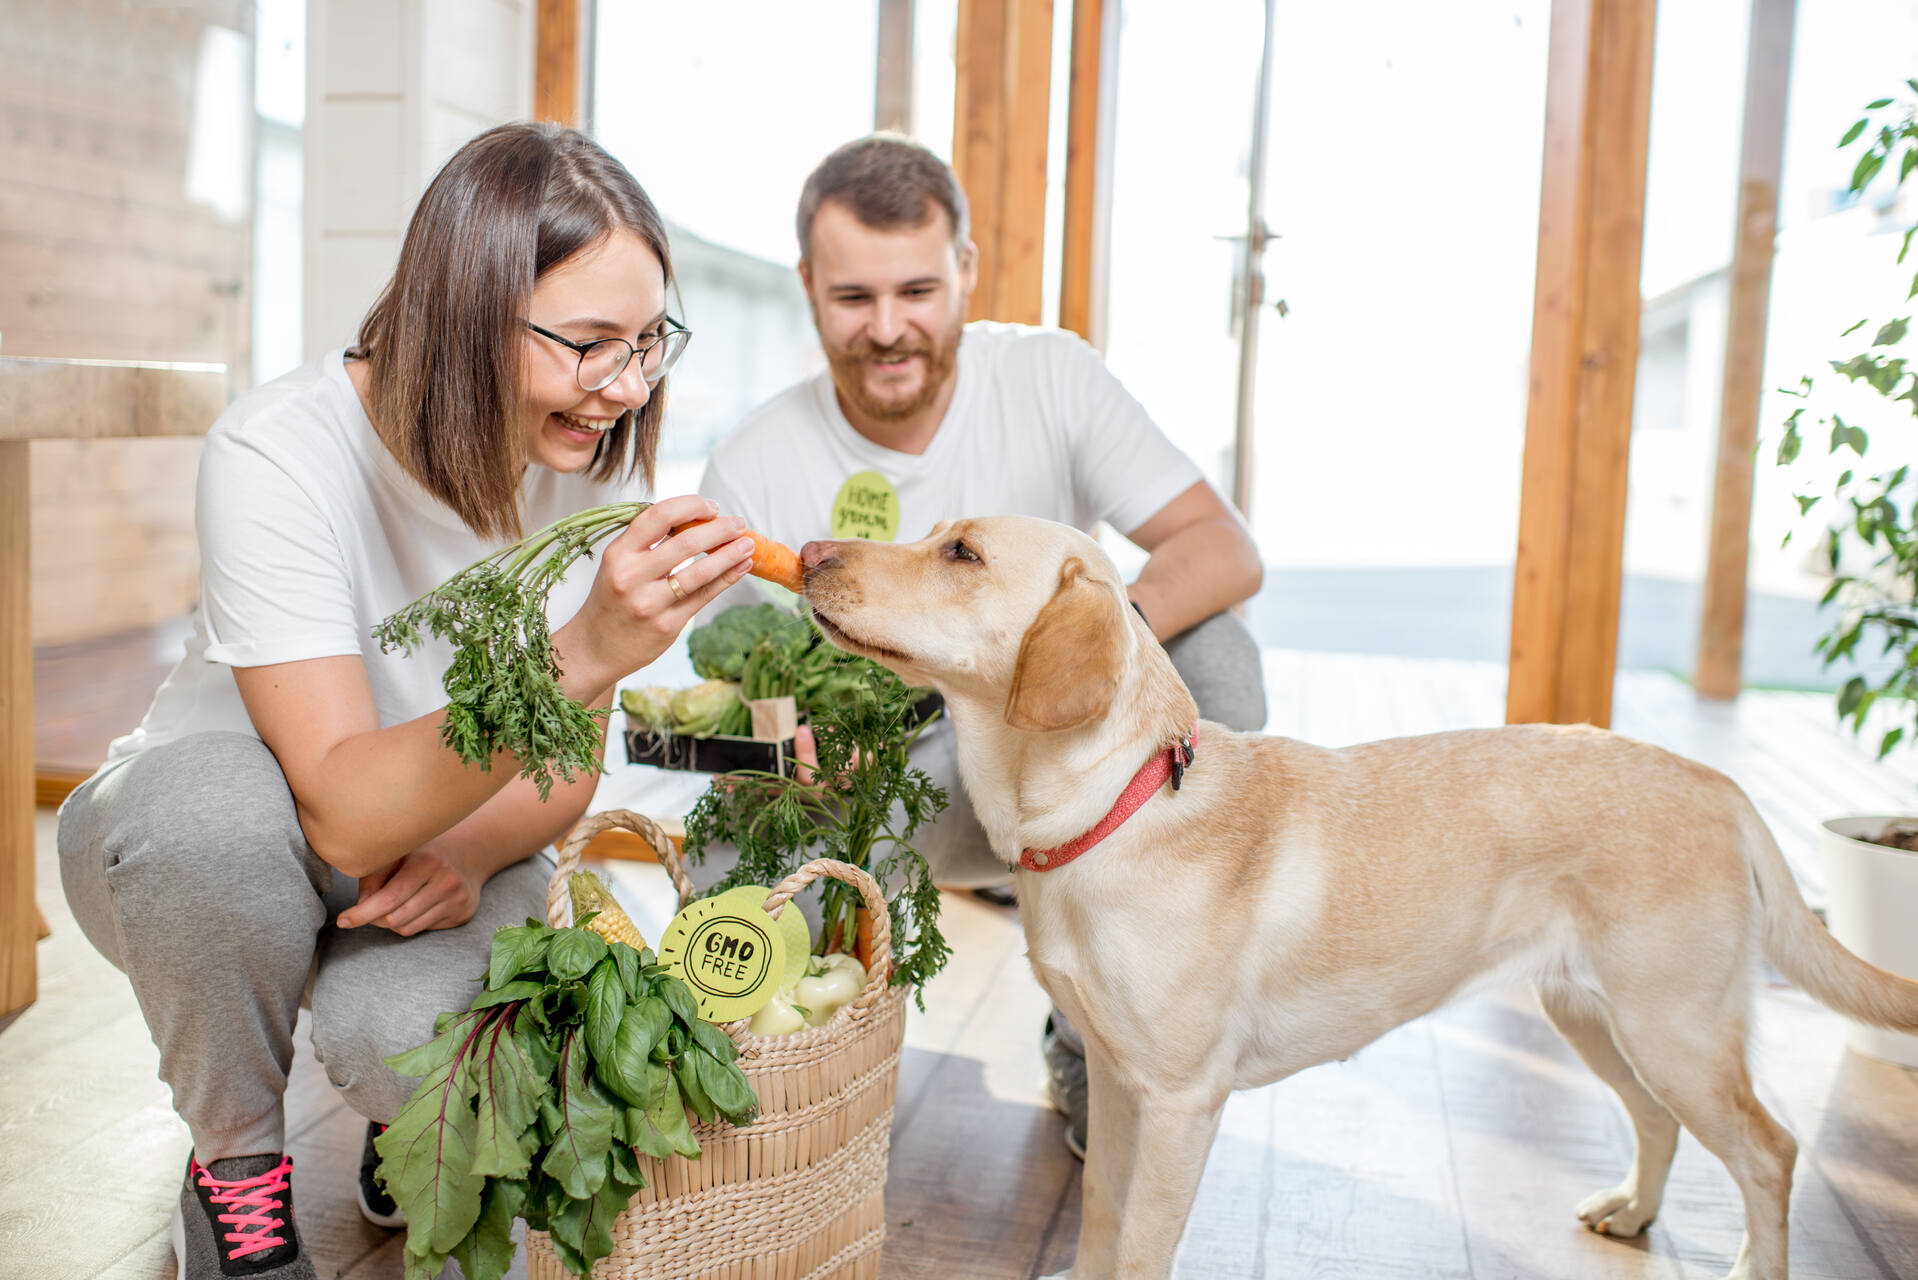 A couple feeding a dog a carrot out of a bag of groceries